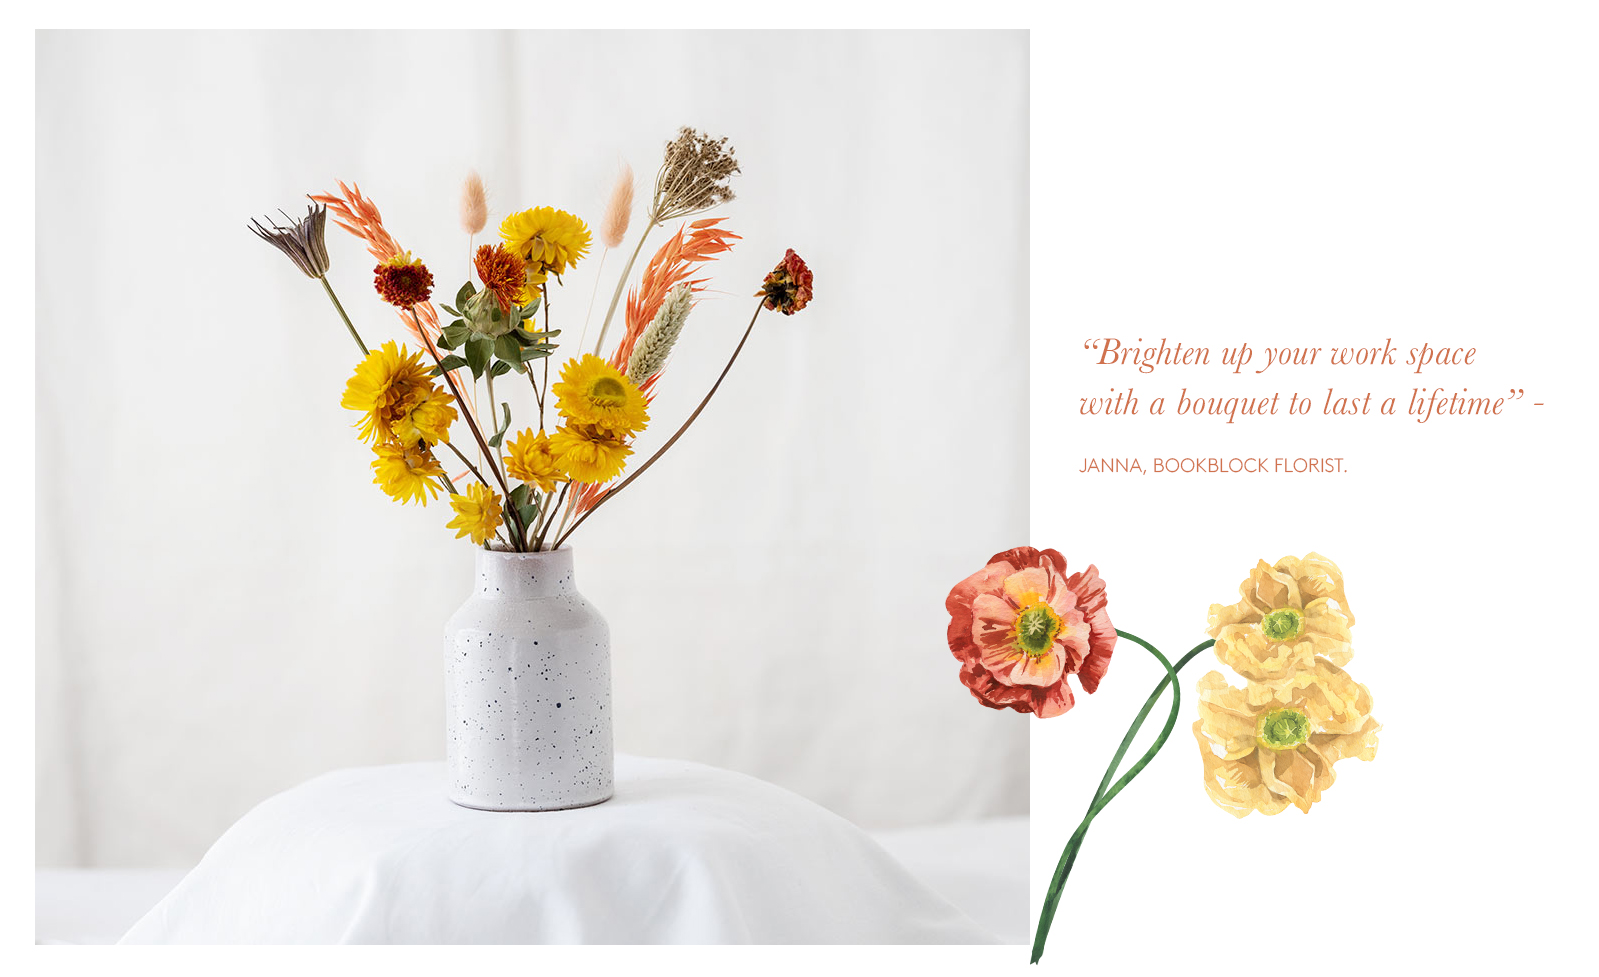 Sedona Dried Flower Stem Box in White Speckle Glaze Clay Vase with orange and yellow floral decoration and a quote from a Bookblock florist